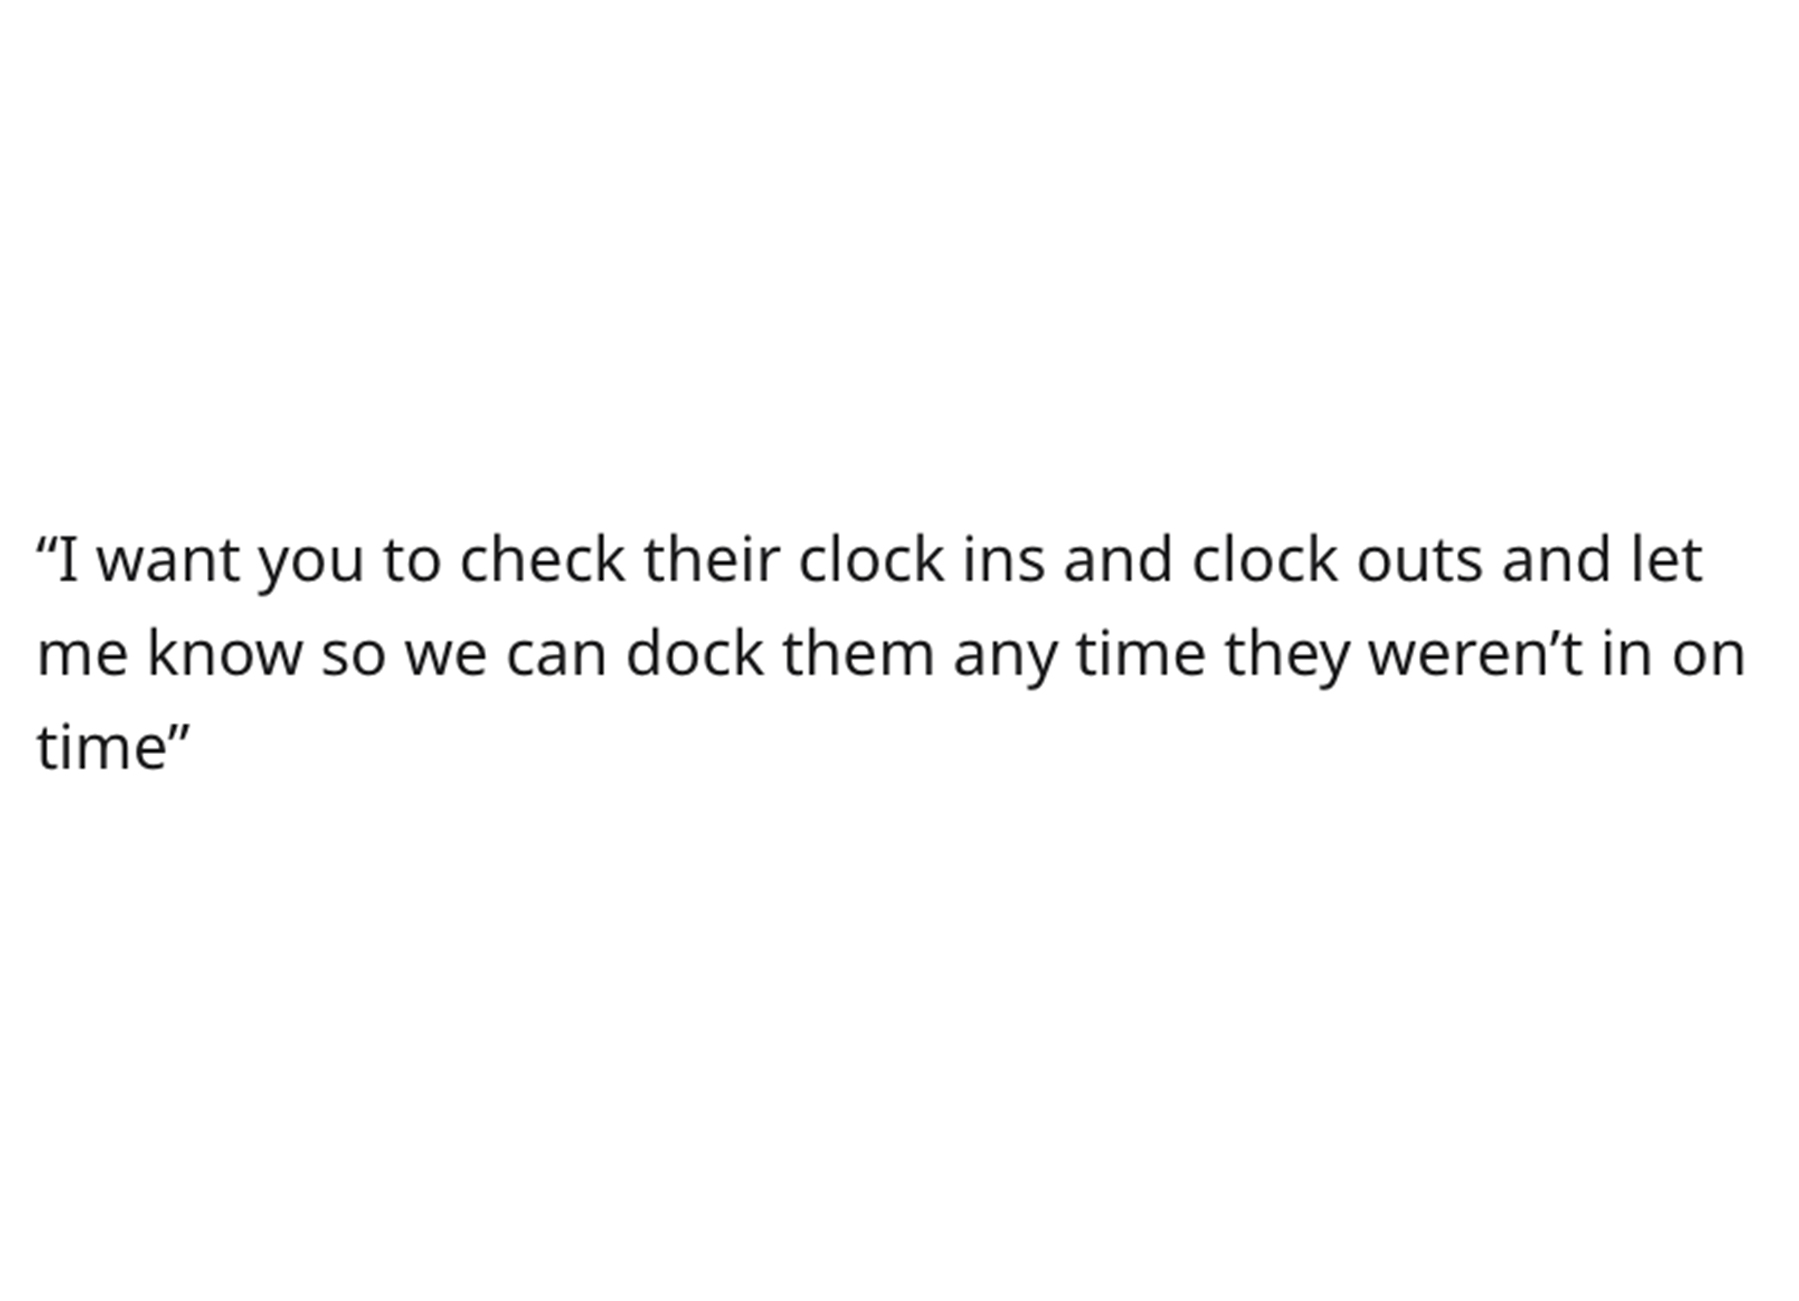 Supervisor Sticks it to Cheap Boss - no one is posting their failures - "I want you to check their clock ins and clock outs and let me know so we can dock them any time they weren't in on time"